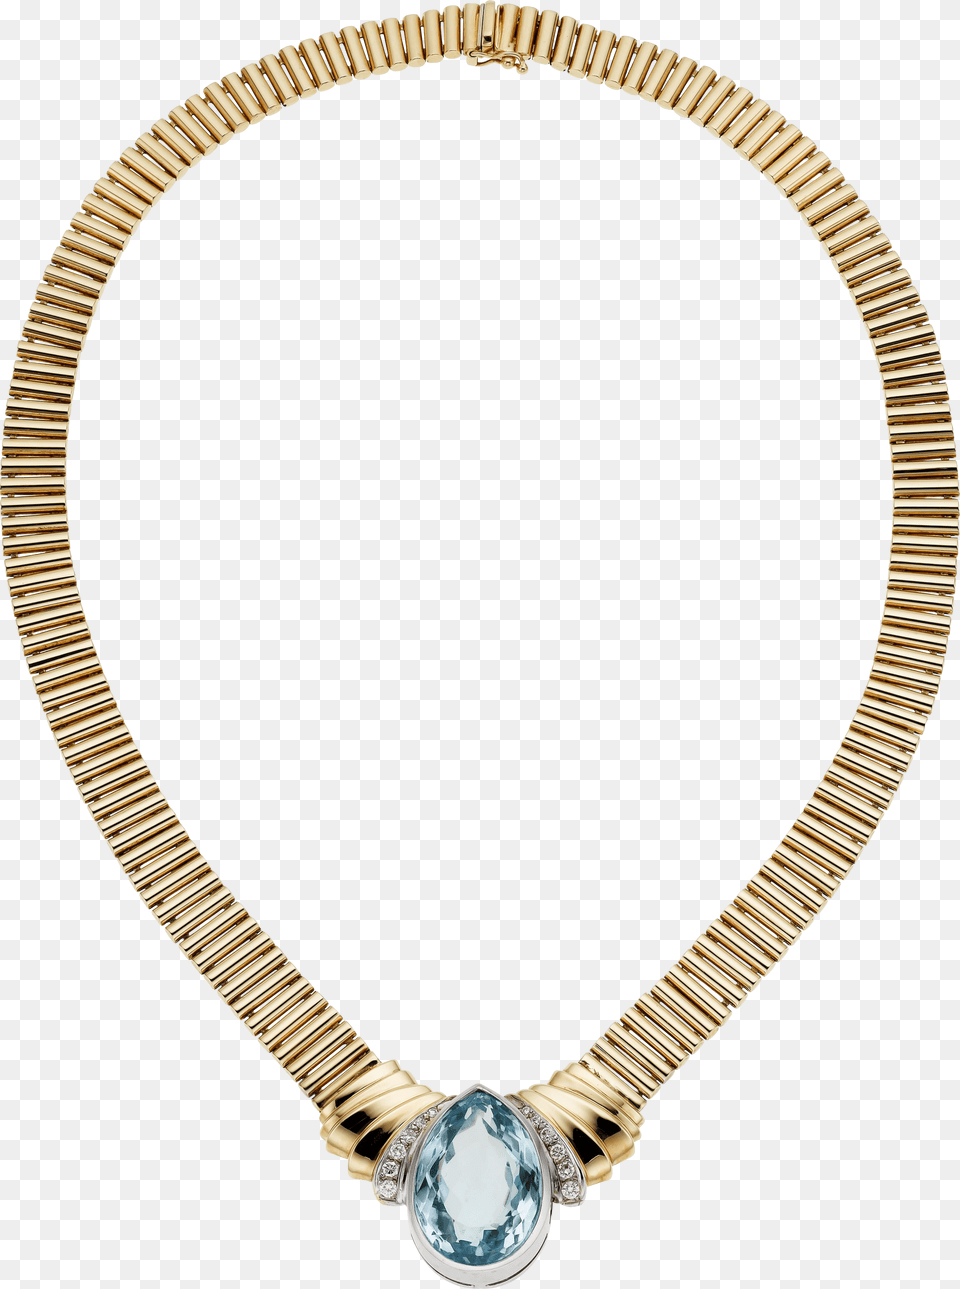 Necklace Necklace, Accessories, Jewelry, Diamond, Gemstone Png Image